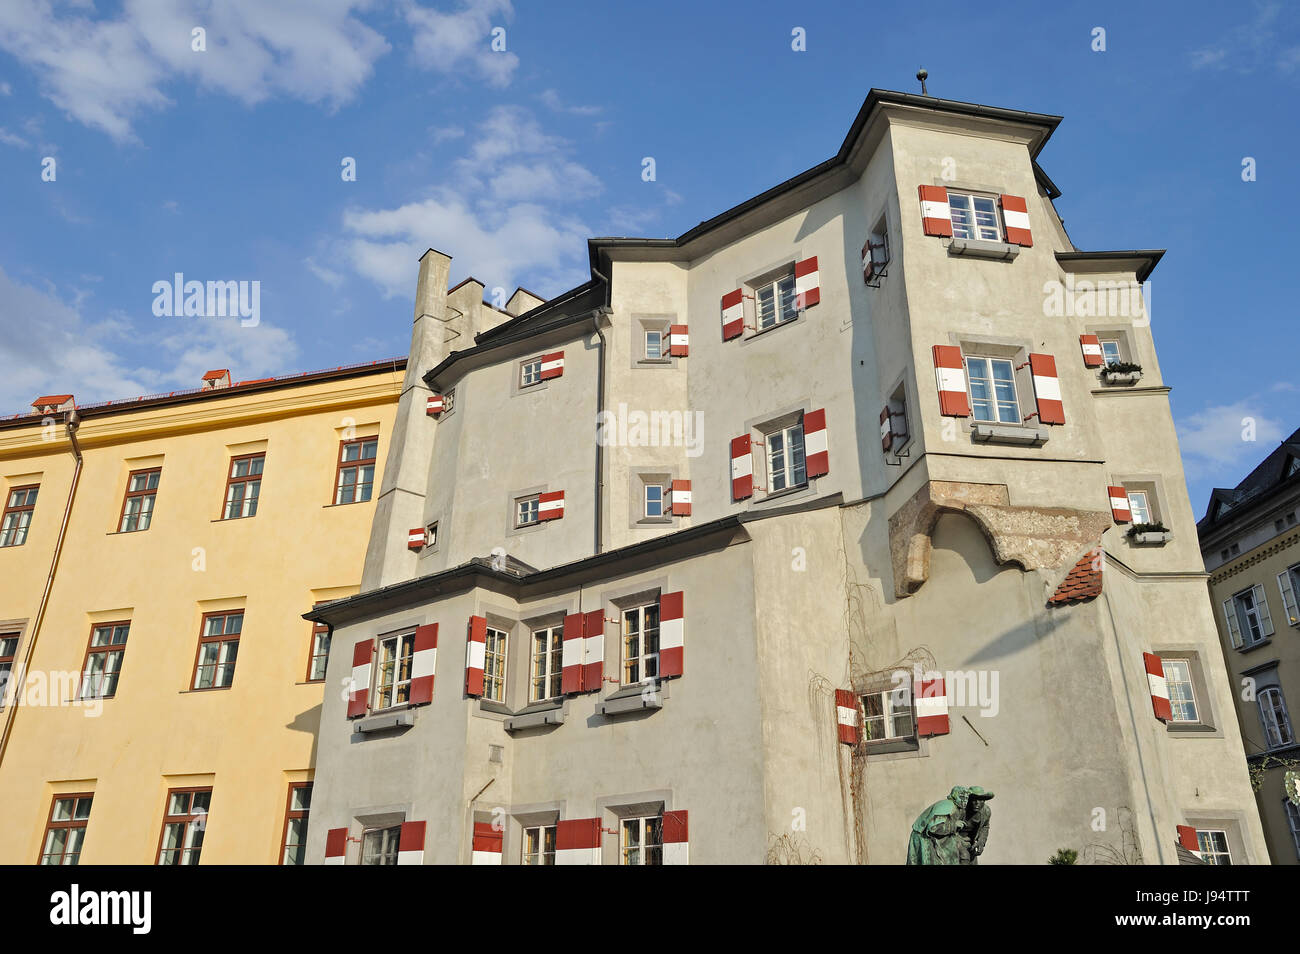 the old town of innsbruck in austria Stock Photo